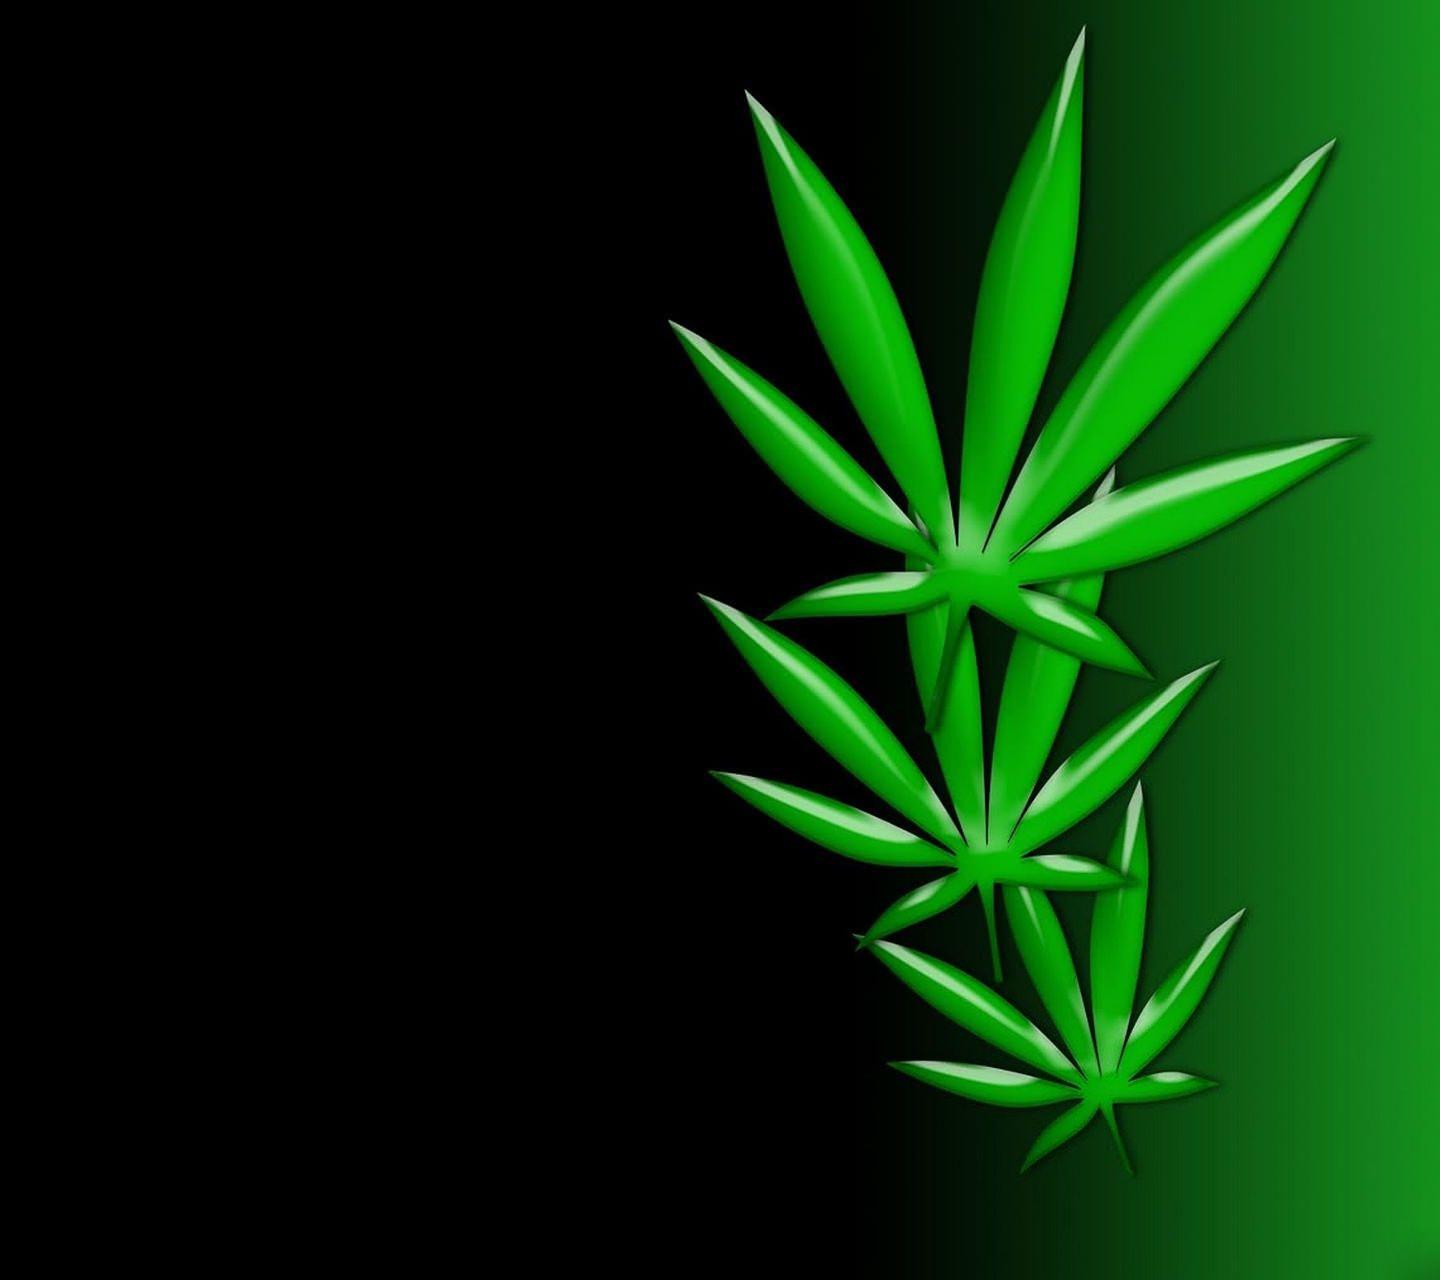 FREE Weed Wallpaper in PSD